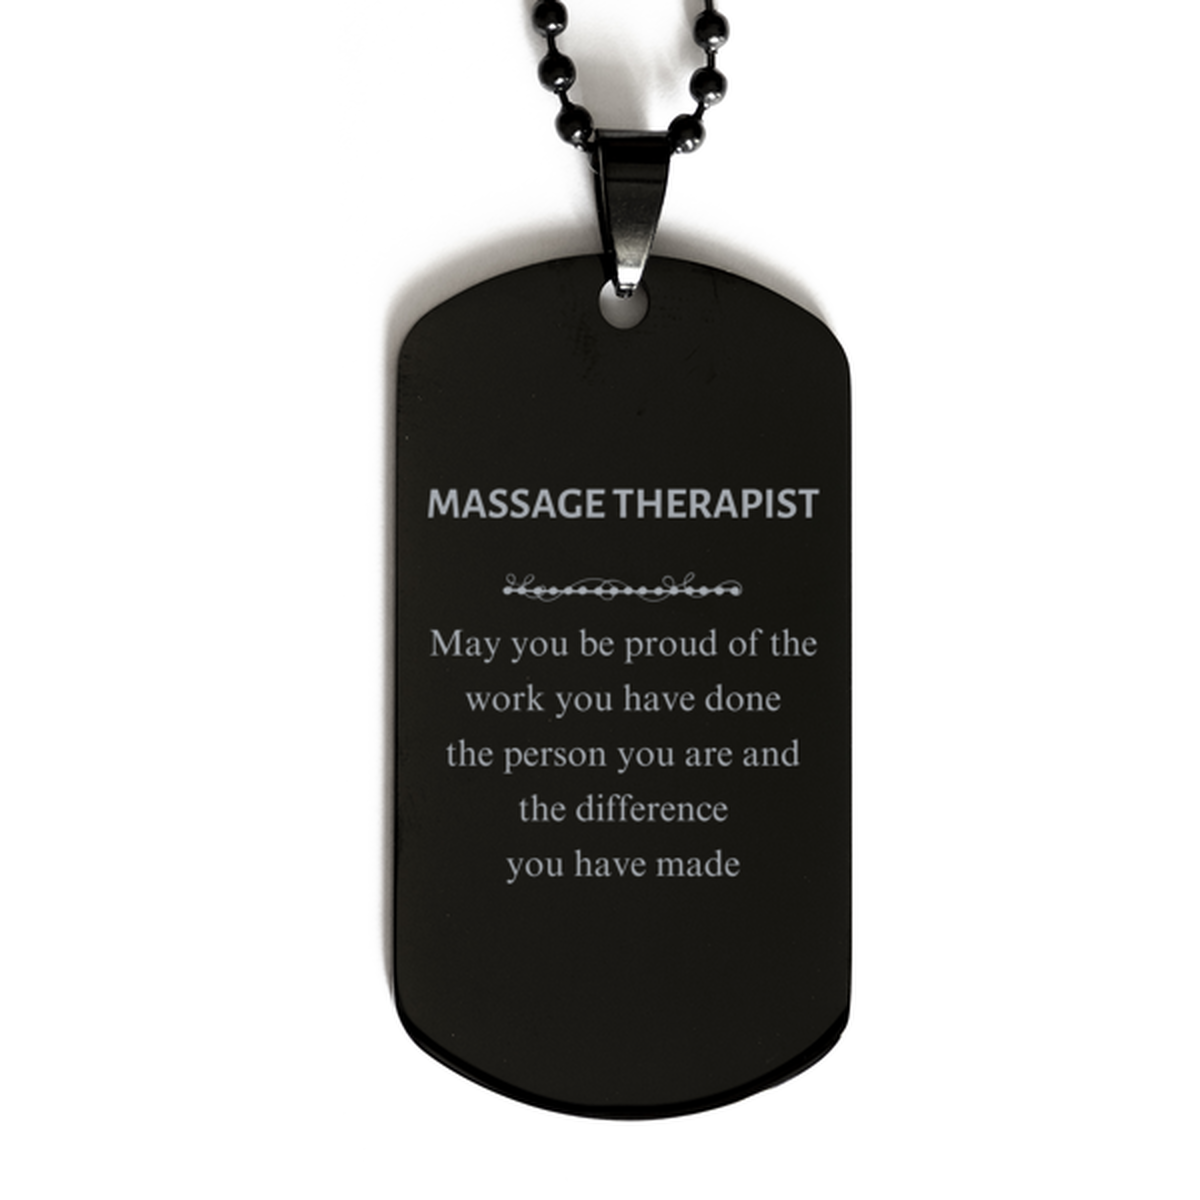 Massage Therapist May you be proud of the work you have done, Retirement Massage Therapist Black Dog Tag for Colleague Appreciation Gifts Amazing for Massage Therapist